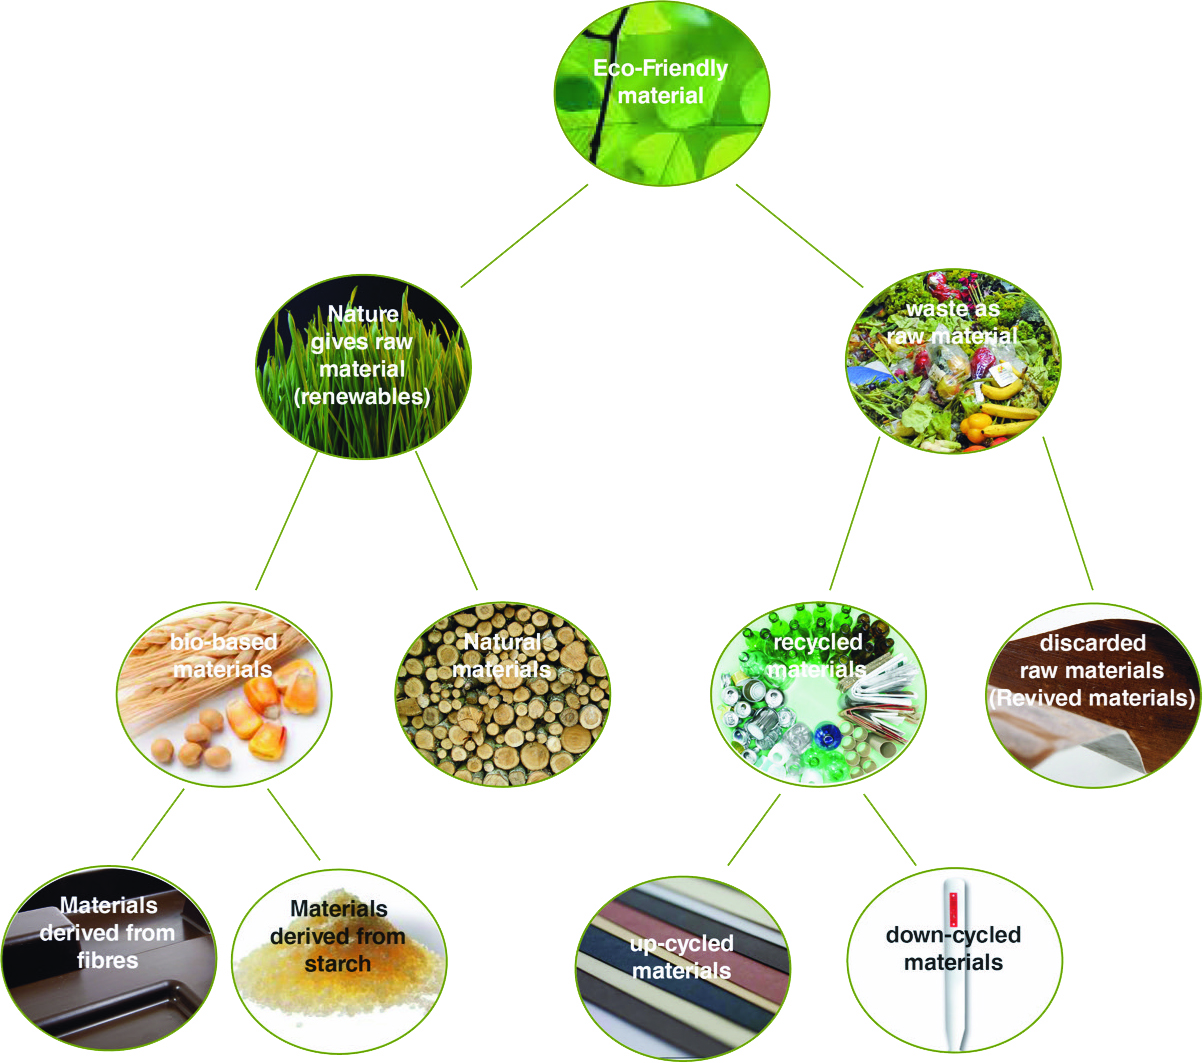 Division of Eco-Friendly Materials